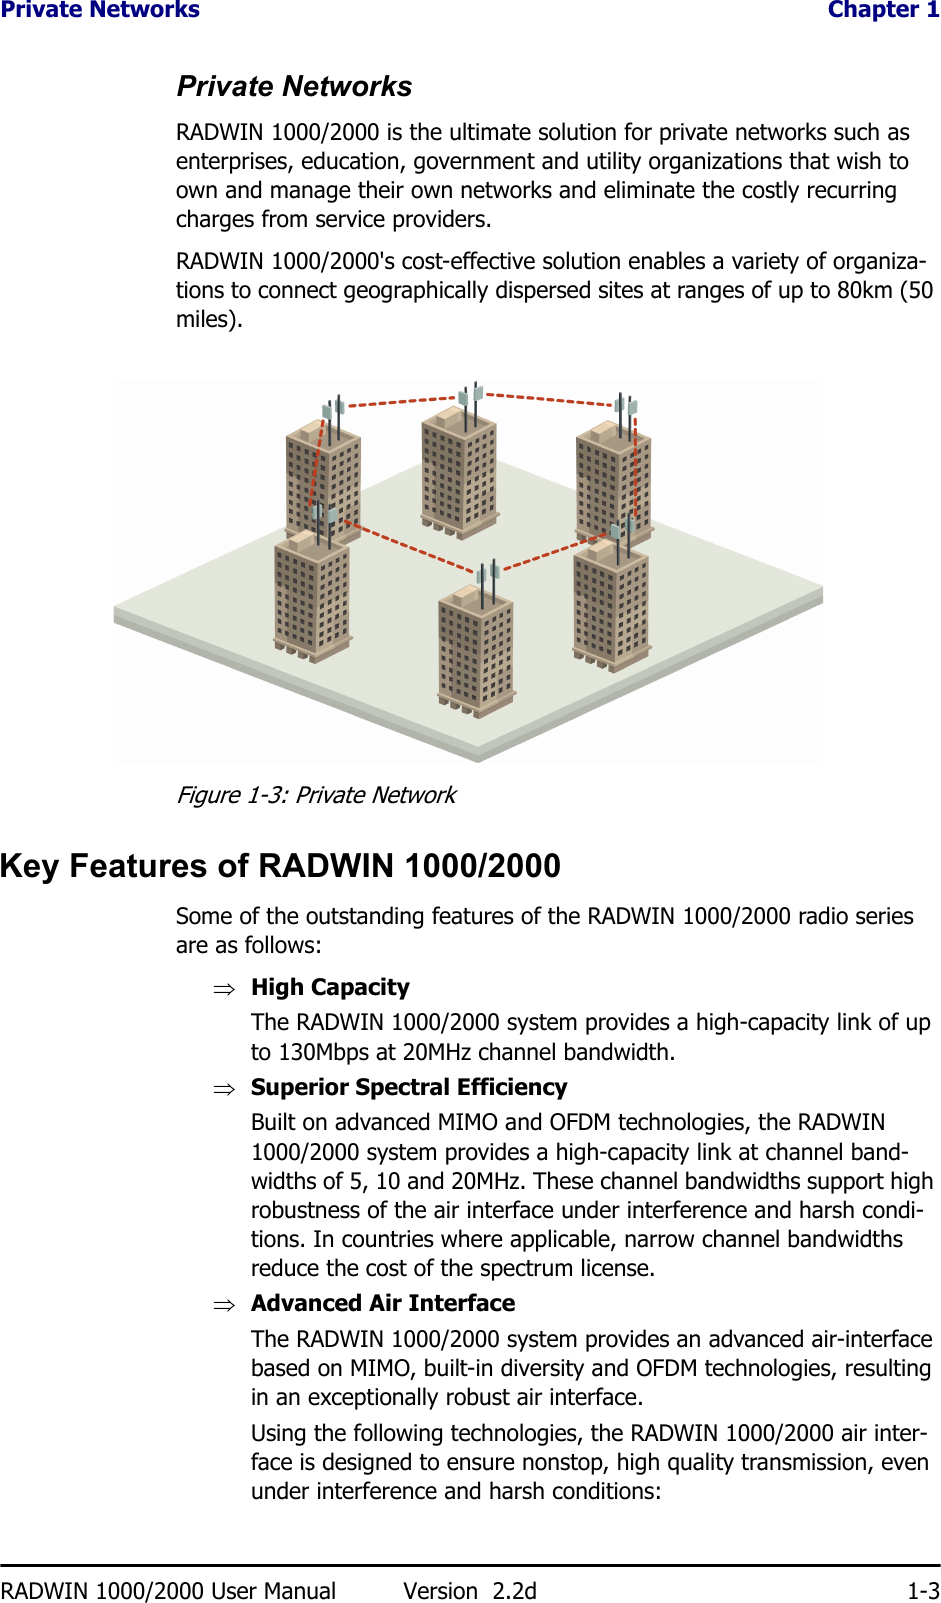 Private Networks  Chapter 1RADWIN 1000/2000 User Manual Version  2.2d 1-3Private NetworksRADWIN 1000/2000 is the ultimate solution for private networks such as enterprises, education, government and utility organizations that wish to own and manage their own networks and eliminate the costly recurring charges from service providers.RADWIN 1000/2000&apos;s cost-effective solution enables a variety of organiza-tions to connect geographically dispersed sites at ranges of up to 80km (50 miles).Figure 1-3: Private NetworkKey Features of RADWIN 1000/2000Some of the outstanding features of the RADWIN 1000/2000 radio series are as follows:⇒High CapacityThe RADWIN 1000/2000 system provides a high-capacity link of up to 130Mbps at 20MHz channel bandwidth.⇒Superior Spectral EfficiencyBuilt on advanced MIMO and OFDM technologies, the RADWIN 1000/2000 system provides a high-capacity link at channel band-widths of 5, 10 and 20MHz. These channel bandwidths support high robustness of the air interface under interference and harsh condi-tions. In countries where applicable, narrow channel bandwidths reduce the cost of the spectrum license.⇒Advanced Air InterfaceThe RADWIN 1000/2000 system provides an advanced air-interface based on MIMO, built-in diversity and OFDM technologies, resulting in an exceptionally robust air interface. Using the following technologies, the RADWIN 1000/2000 air inter-face is designed to ensure nonstop, high quality transmission, even under interference and harsh conditions: